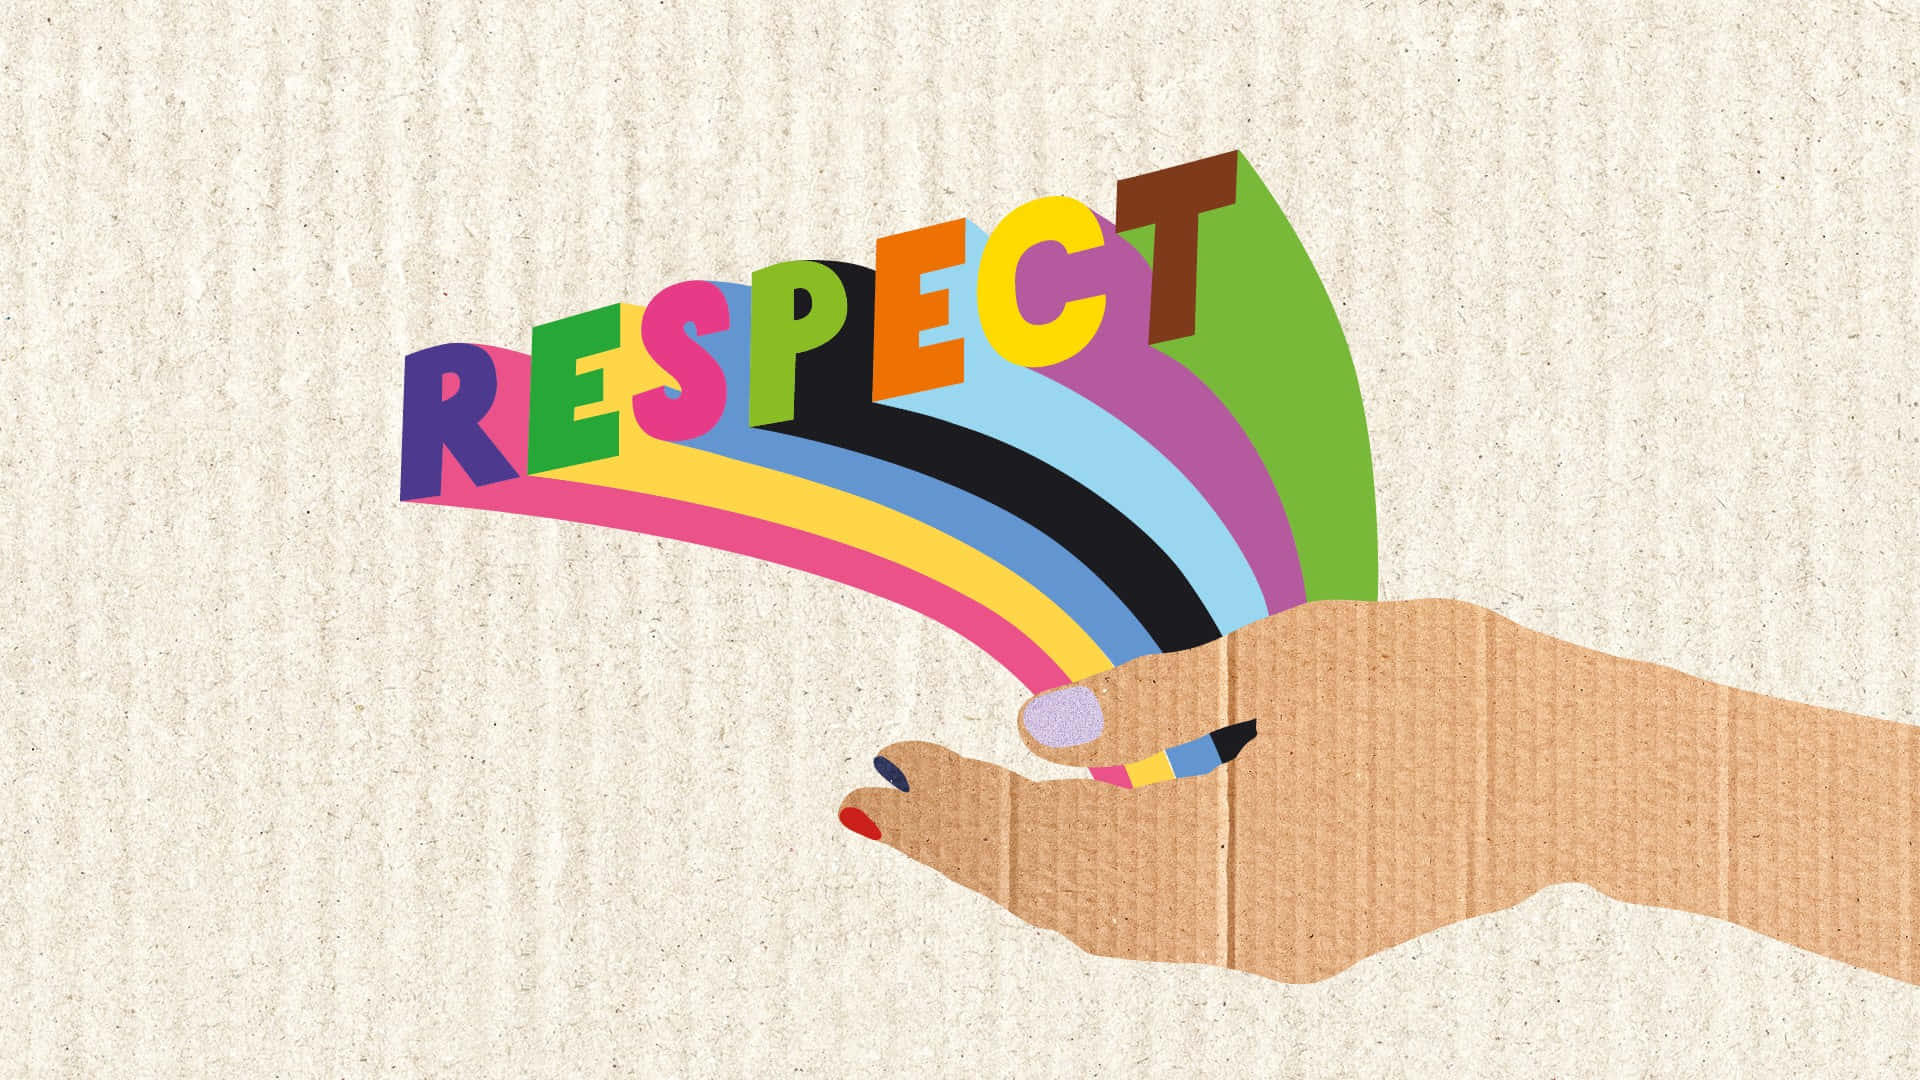 Vibrant Illustration Depicting the Word 'Respect'